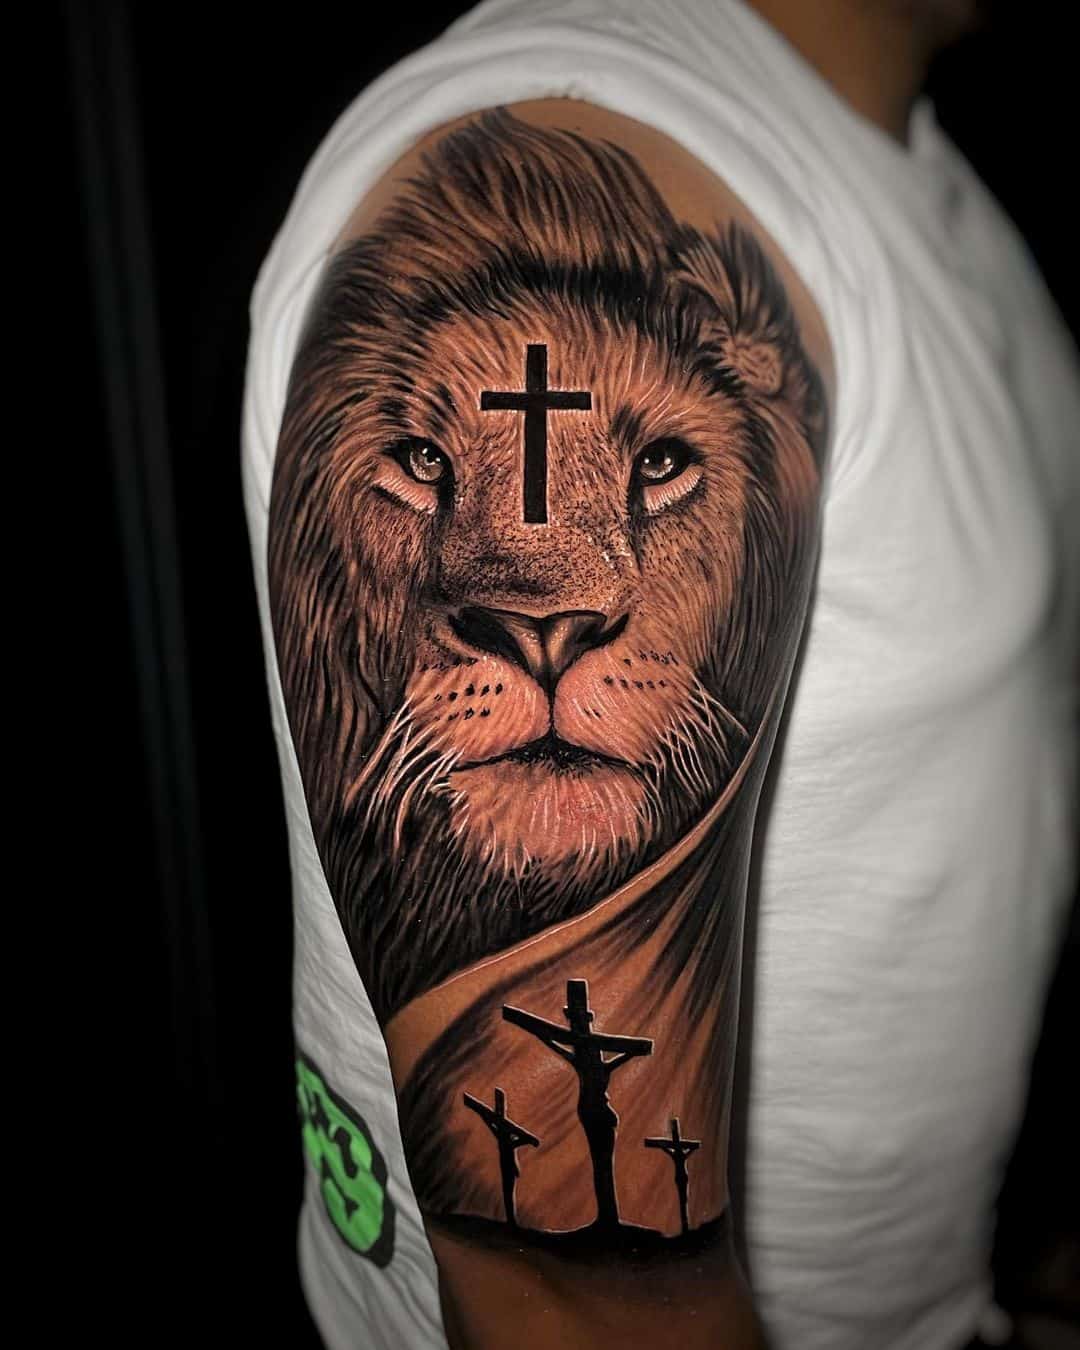 Tattoo uploaded by World Famous Tattoo Art Gallery Long Island • #lion # compass #rose by Po • Tattoodo